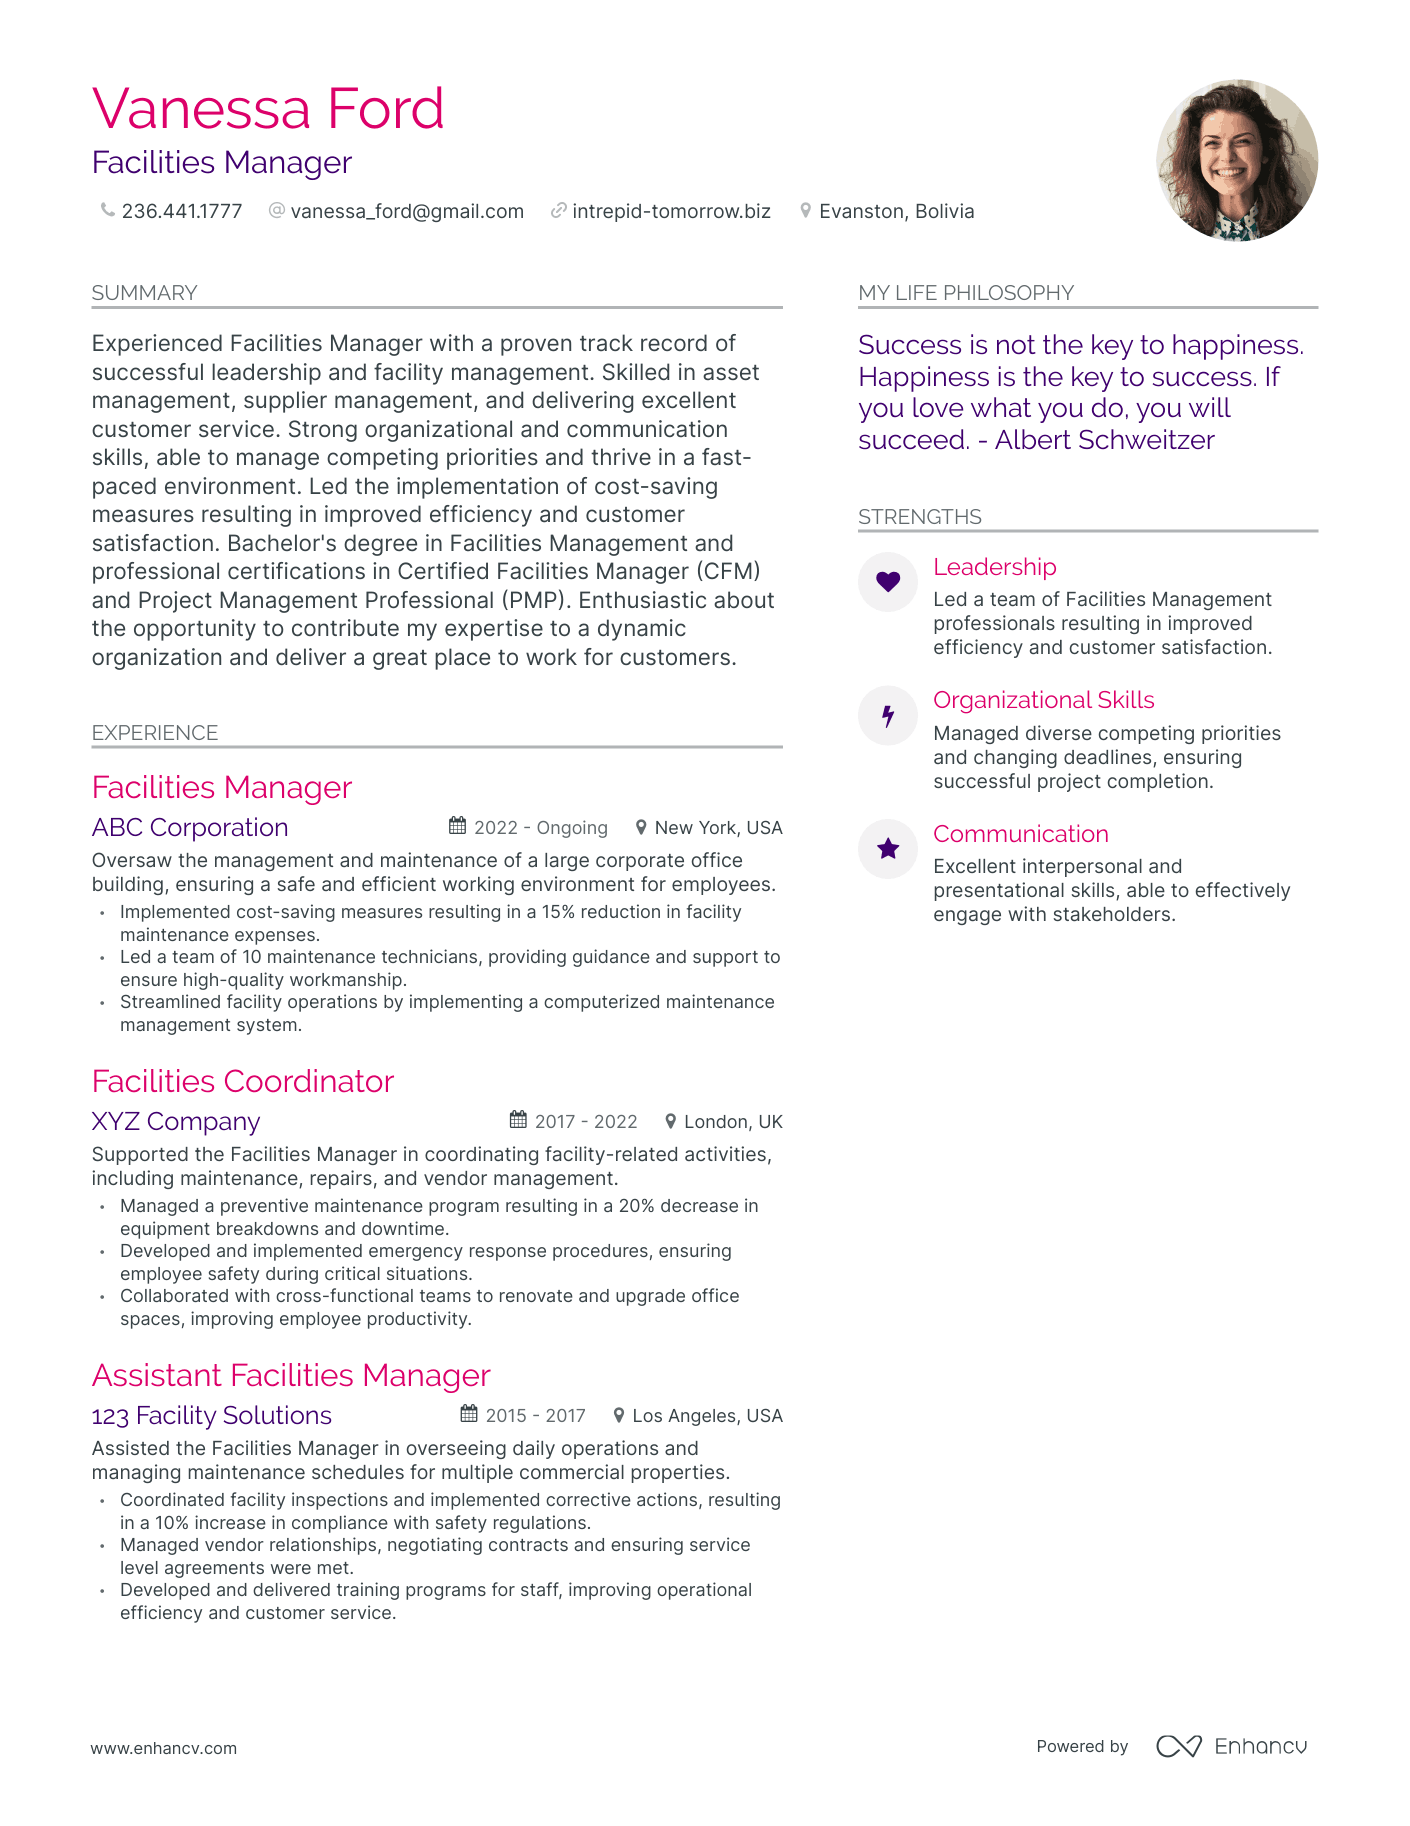 Facilities Manager resume example